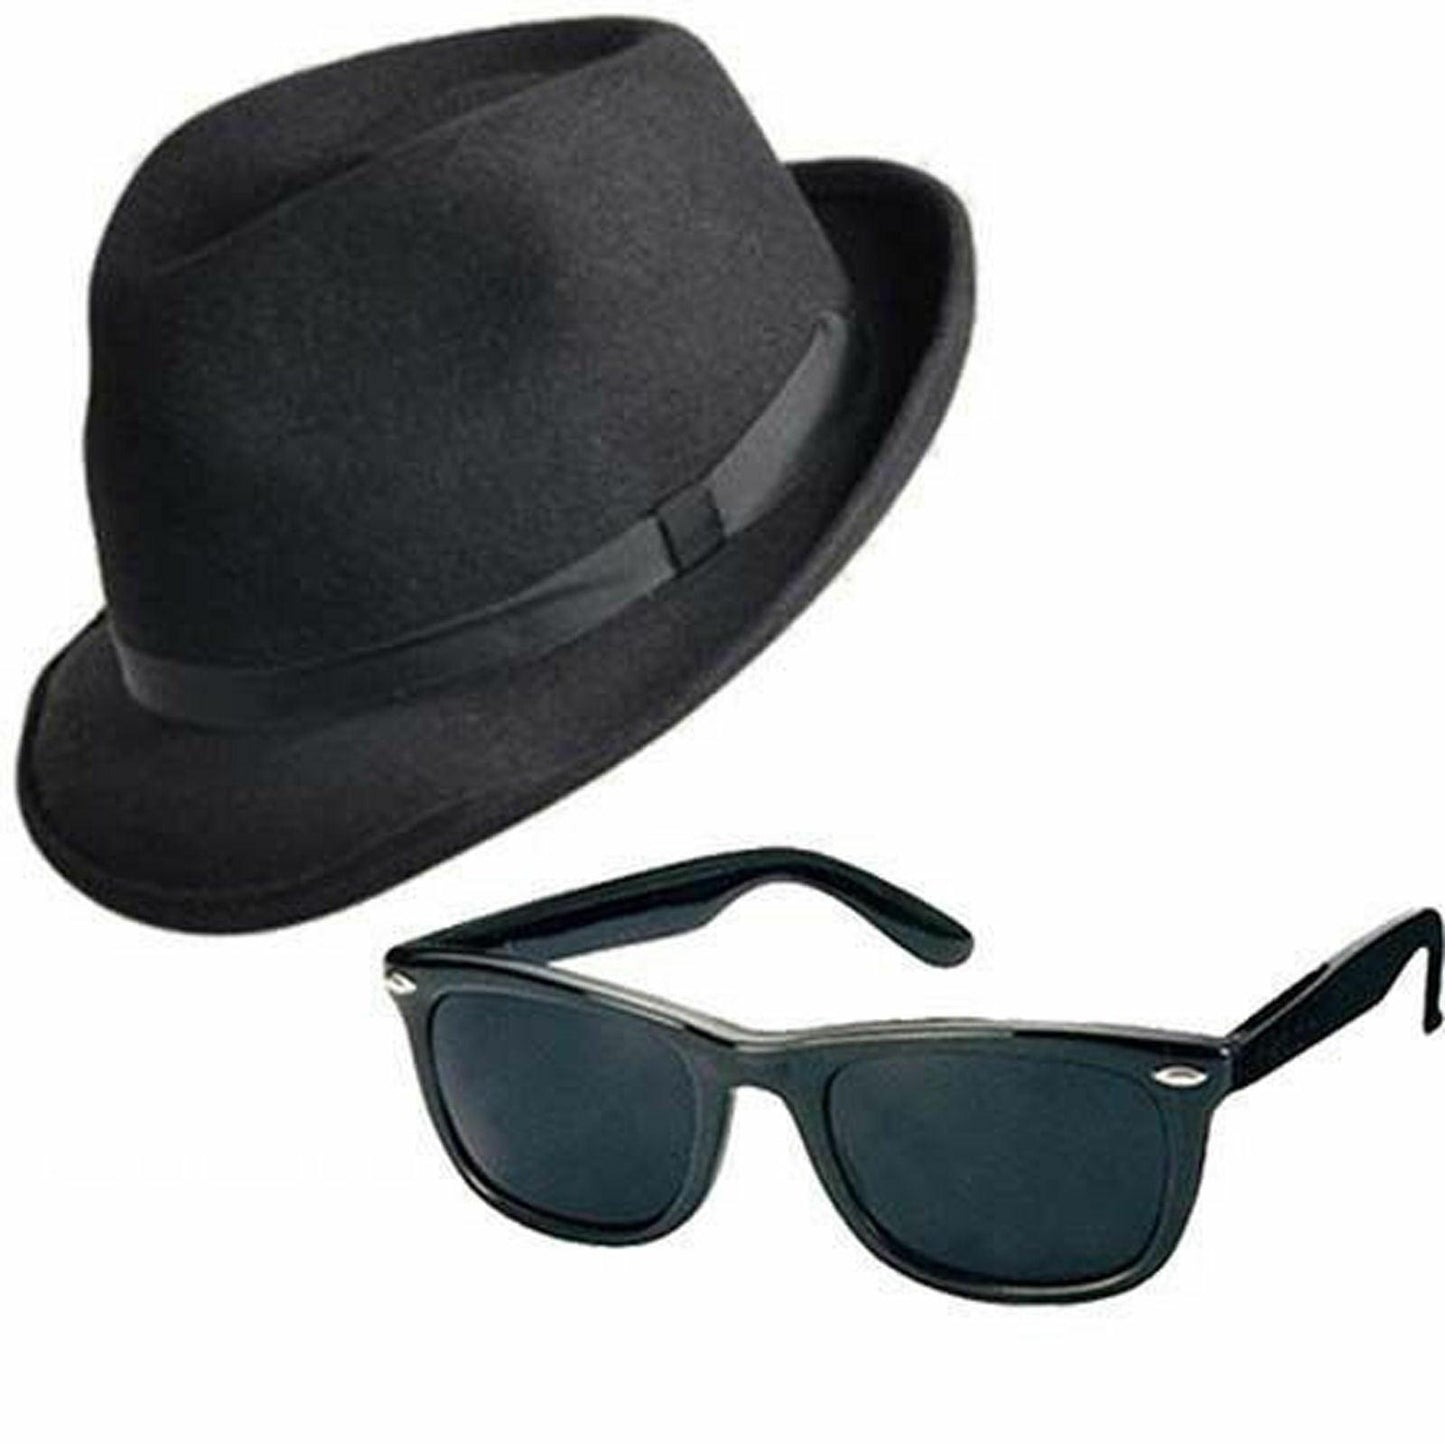 Hat Glasses Plain Tie Sideburns Blue Brothers Fancy Outfit Set - Labreeze